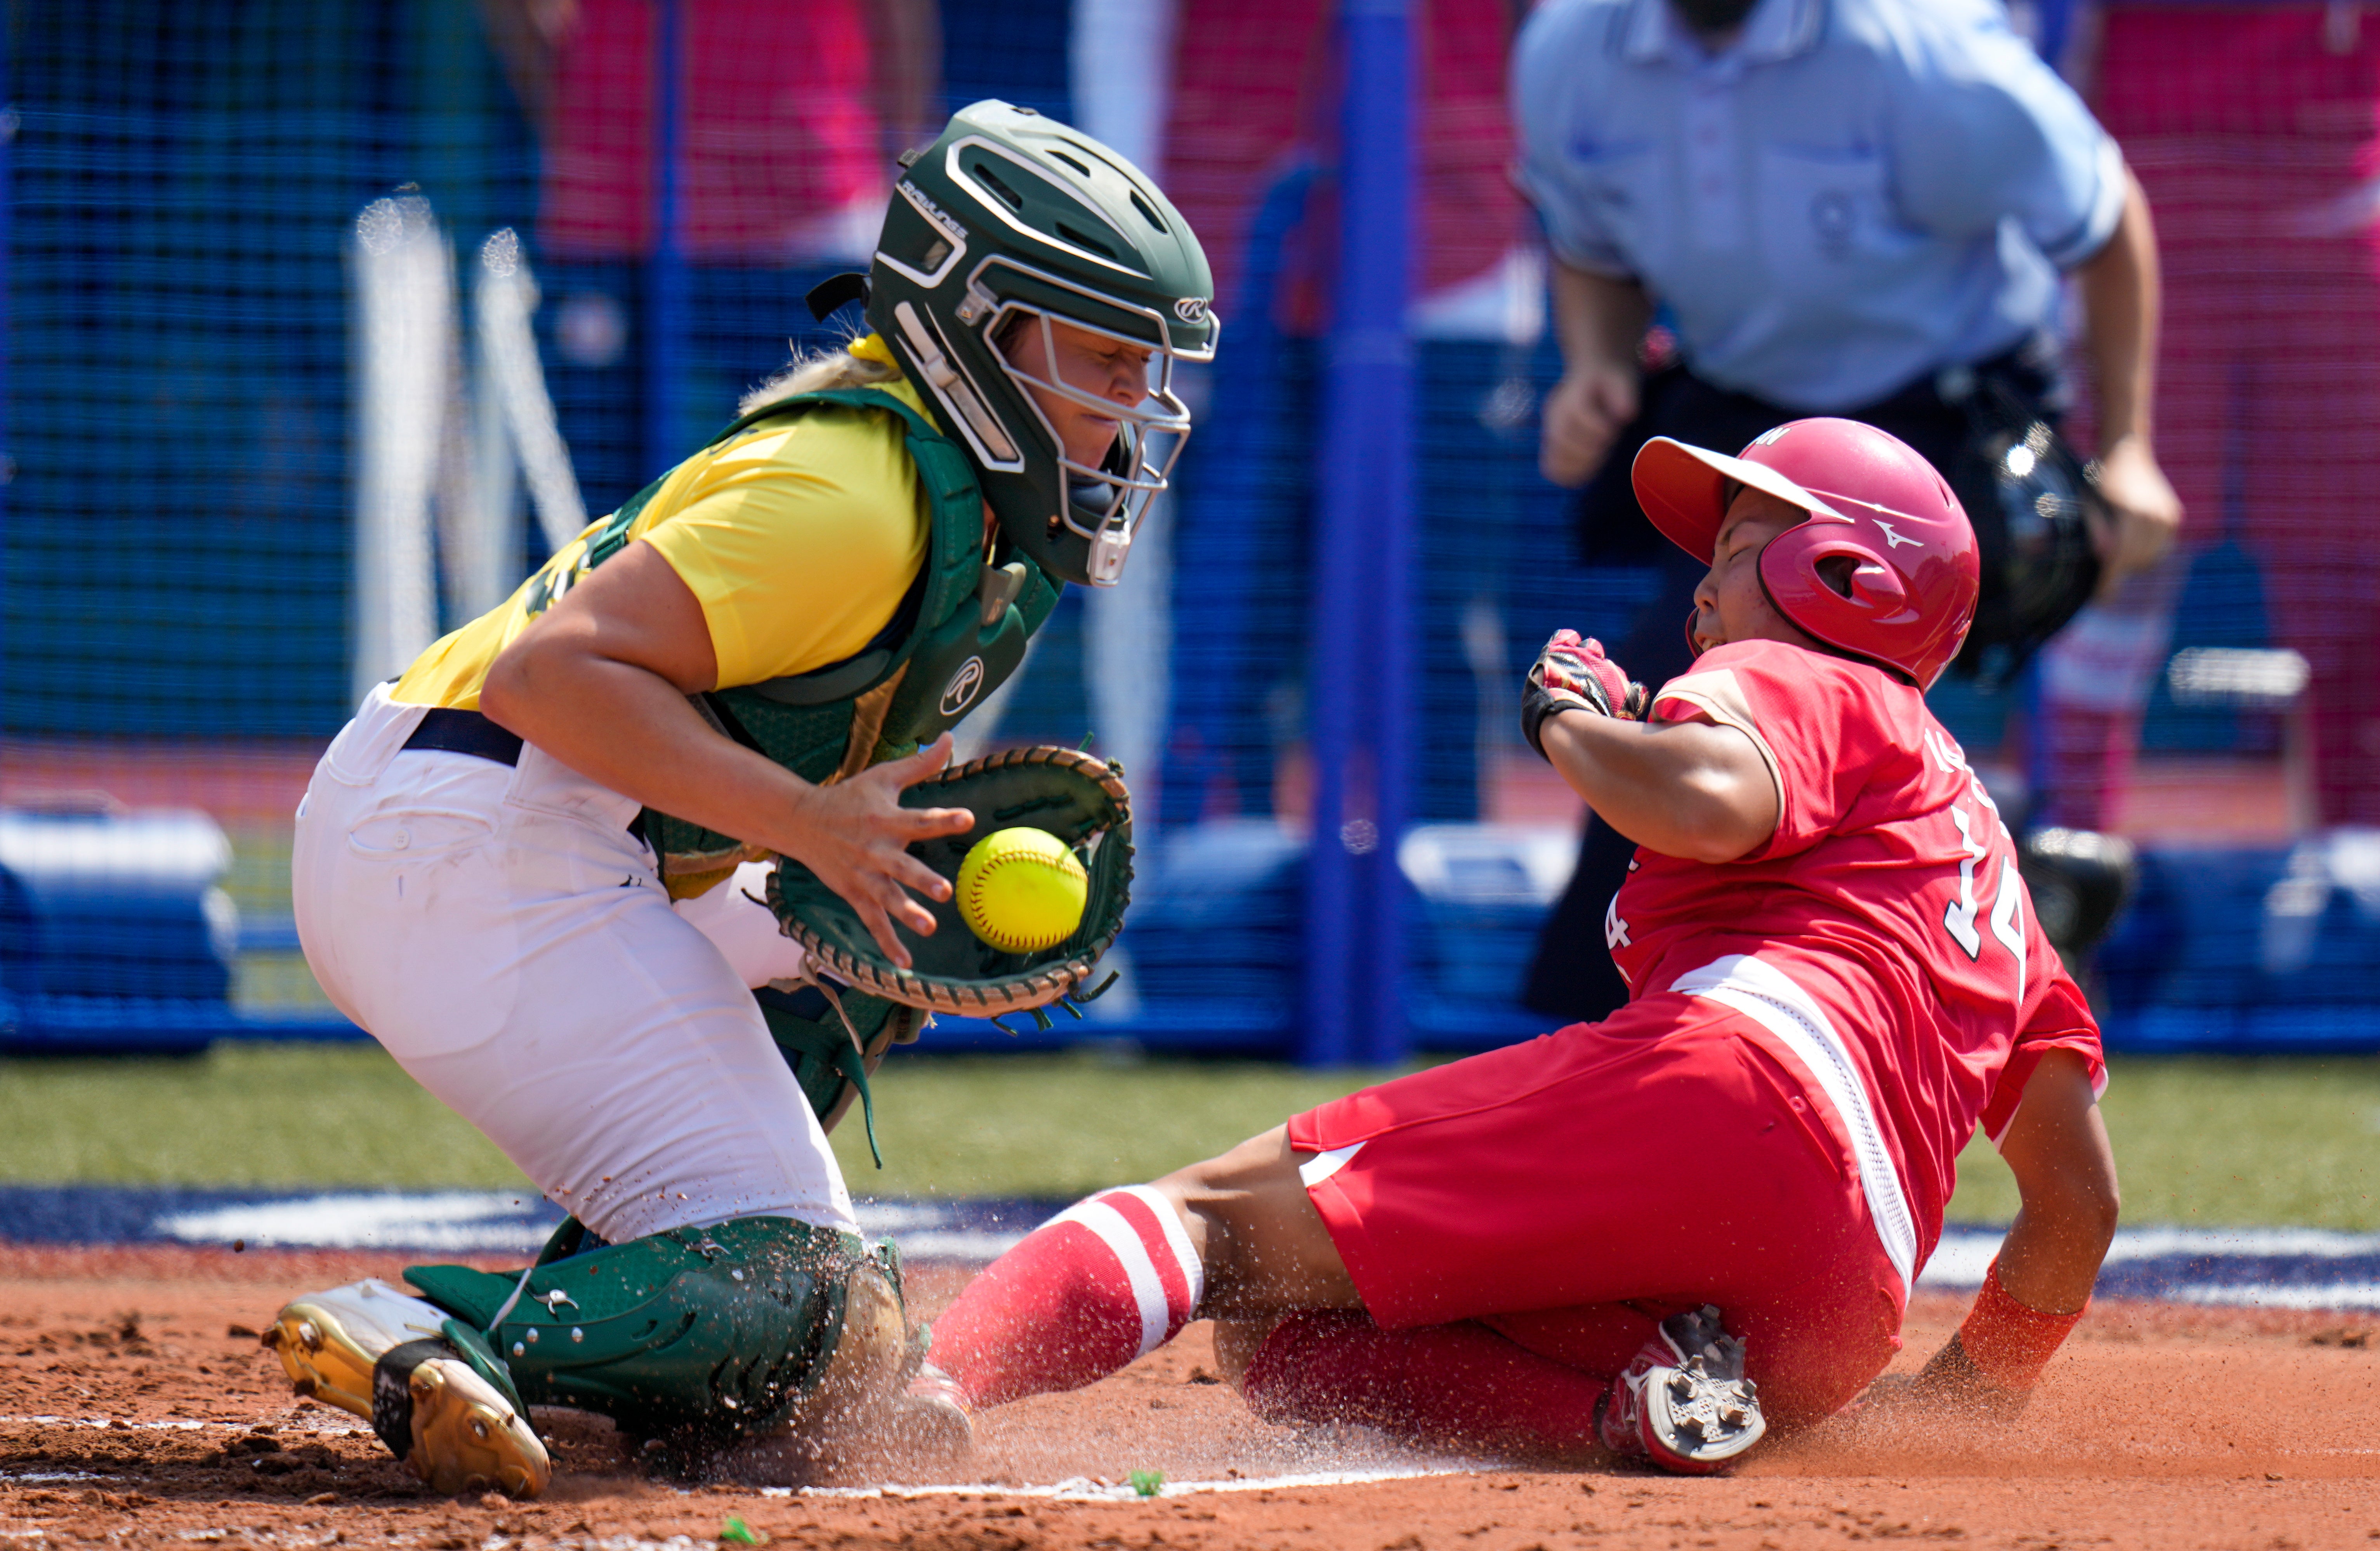 A Japan player slides onto base as an Australia player catches the softball